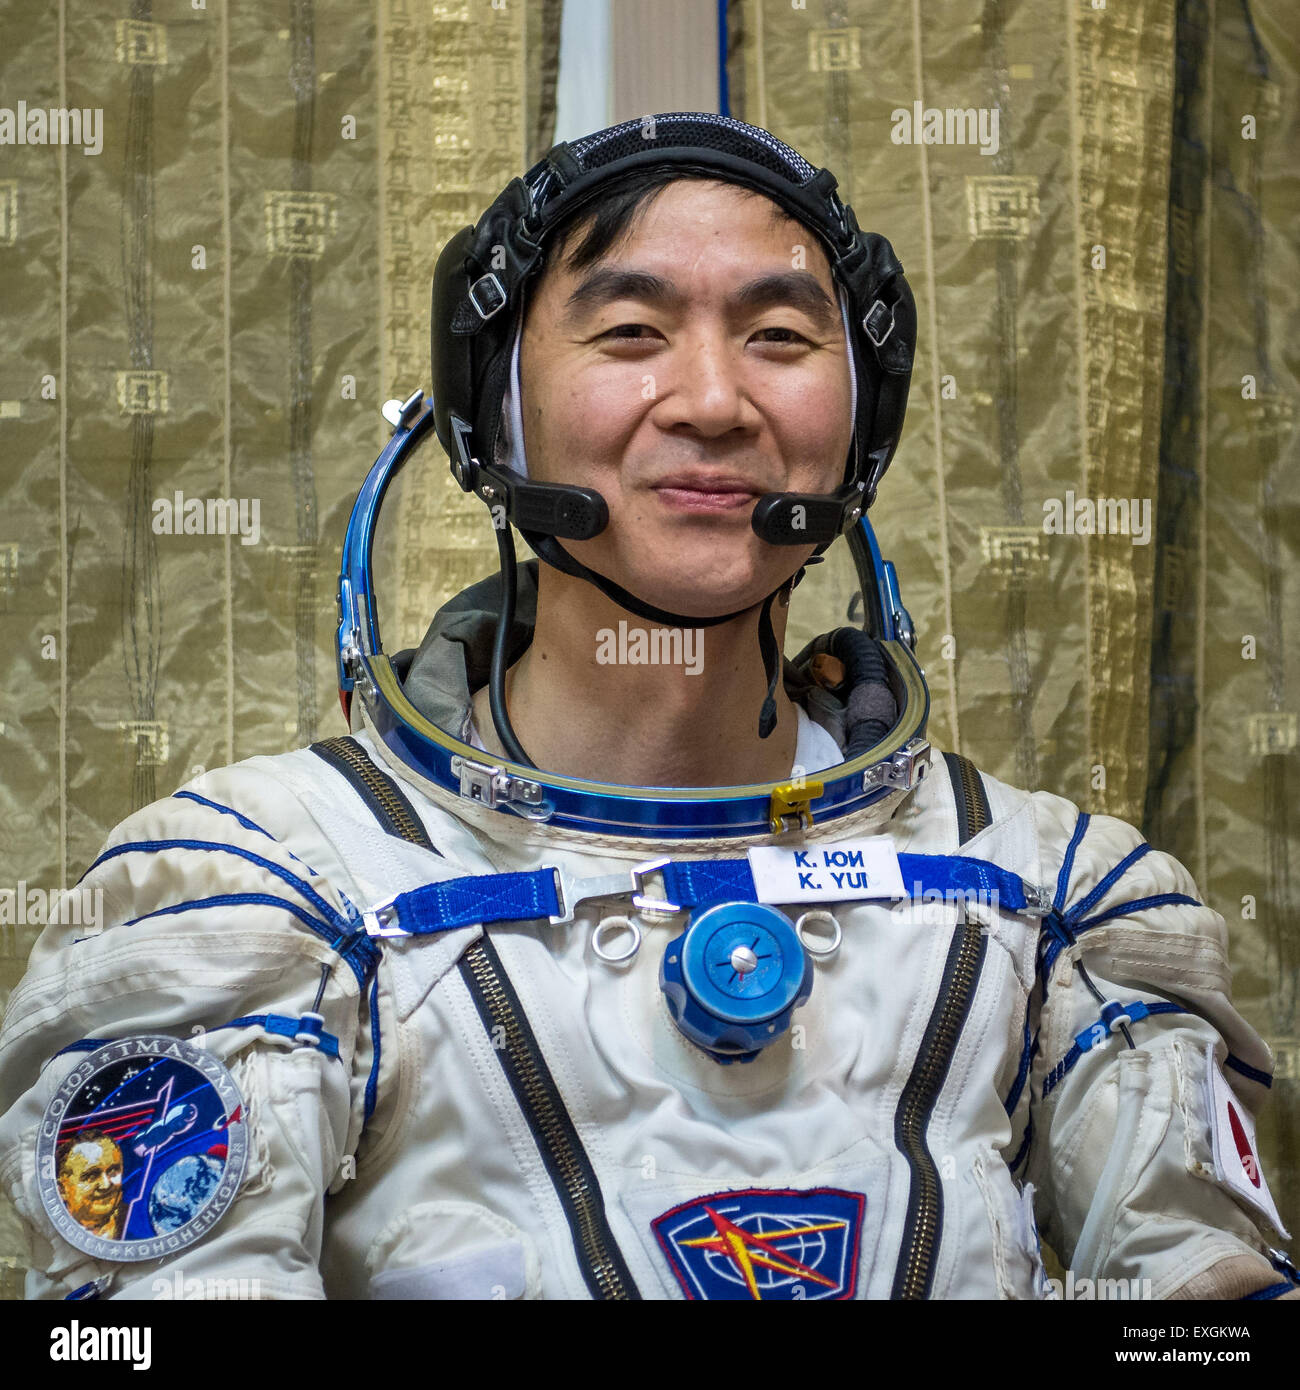 Japan Aerospace Exploration Agency astronaut Kimiya Yui participates in the second day of qualification exams, with NASA astronaut Kjell Lindgren and Russian cosmonaut Oleg Kononenko, Thursday, May 7, 2015 at the Gagarin Cosmonaut Training Center (GCTC) in Star City, Russia. The Expedition 44/45 trio is preparing for launch to the International Space Station in their Soyuz TMA-17M spacecraft from the Baikonur Cosmodrome in Kazakhstan. Stock Photo